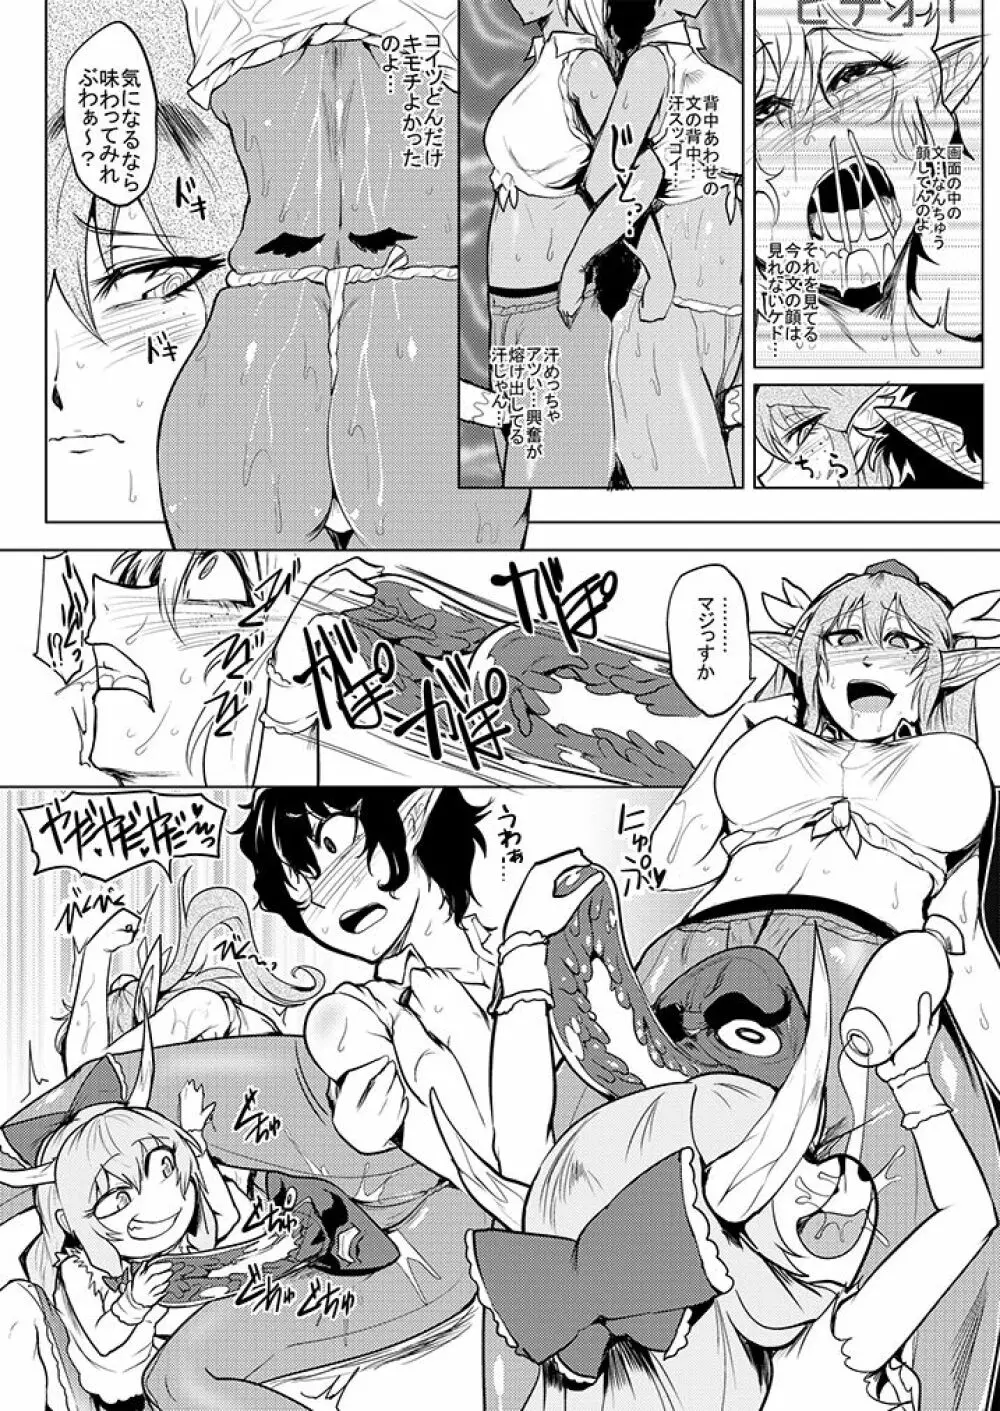 SAKUYA MAID in HEAVEN/ALL IN 1 - page466